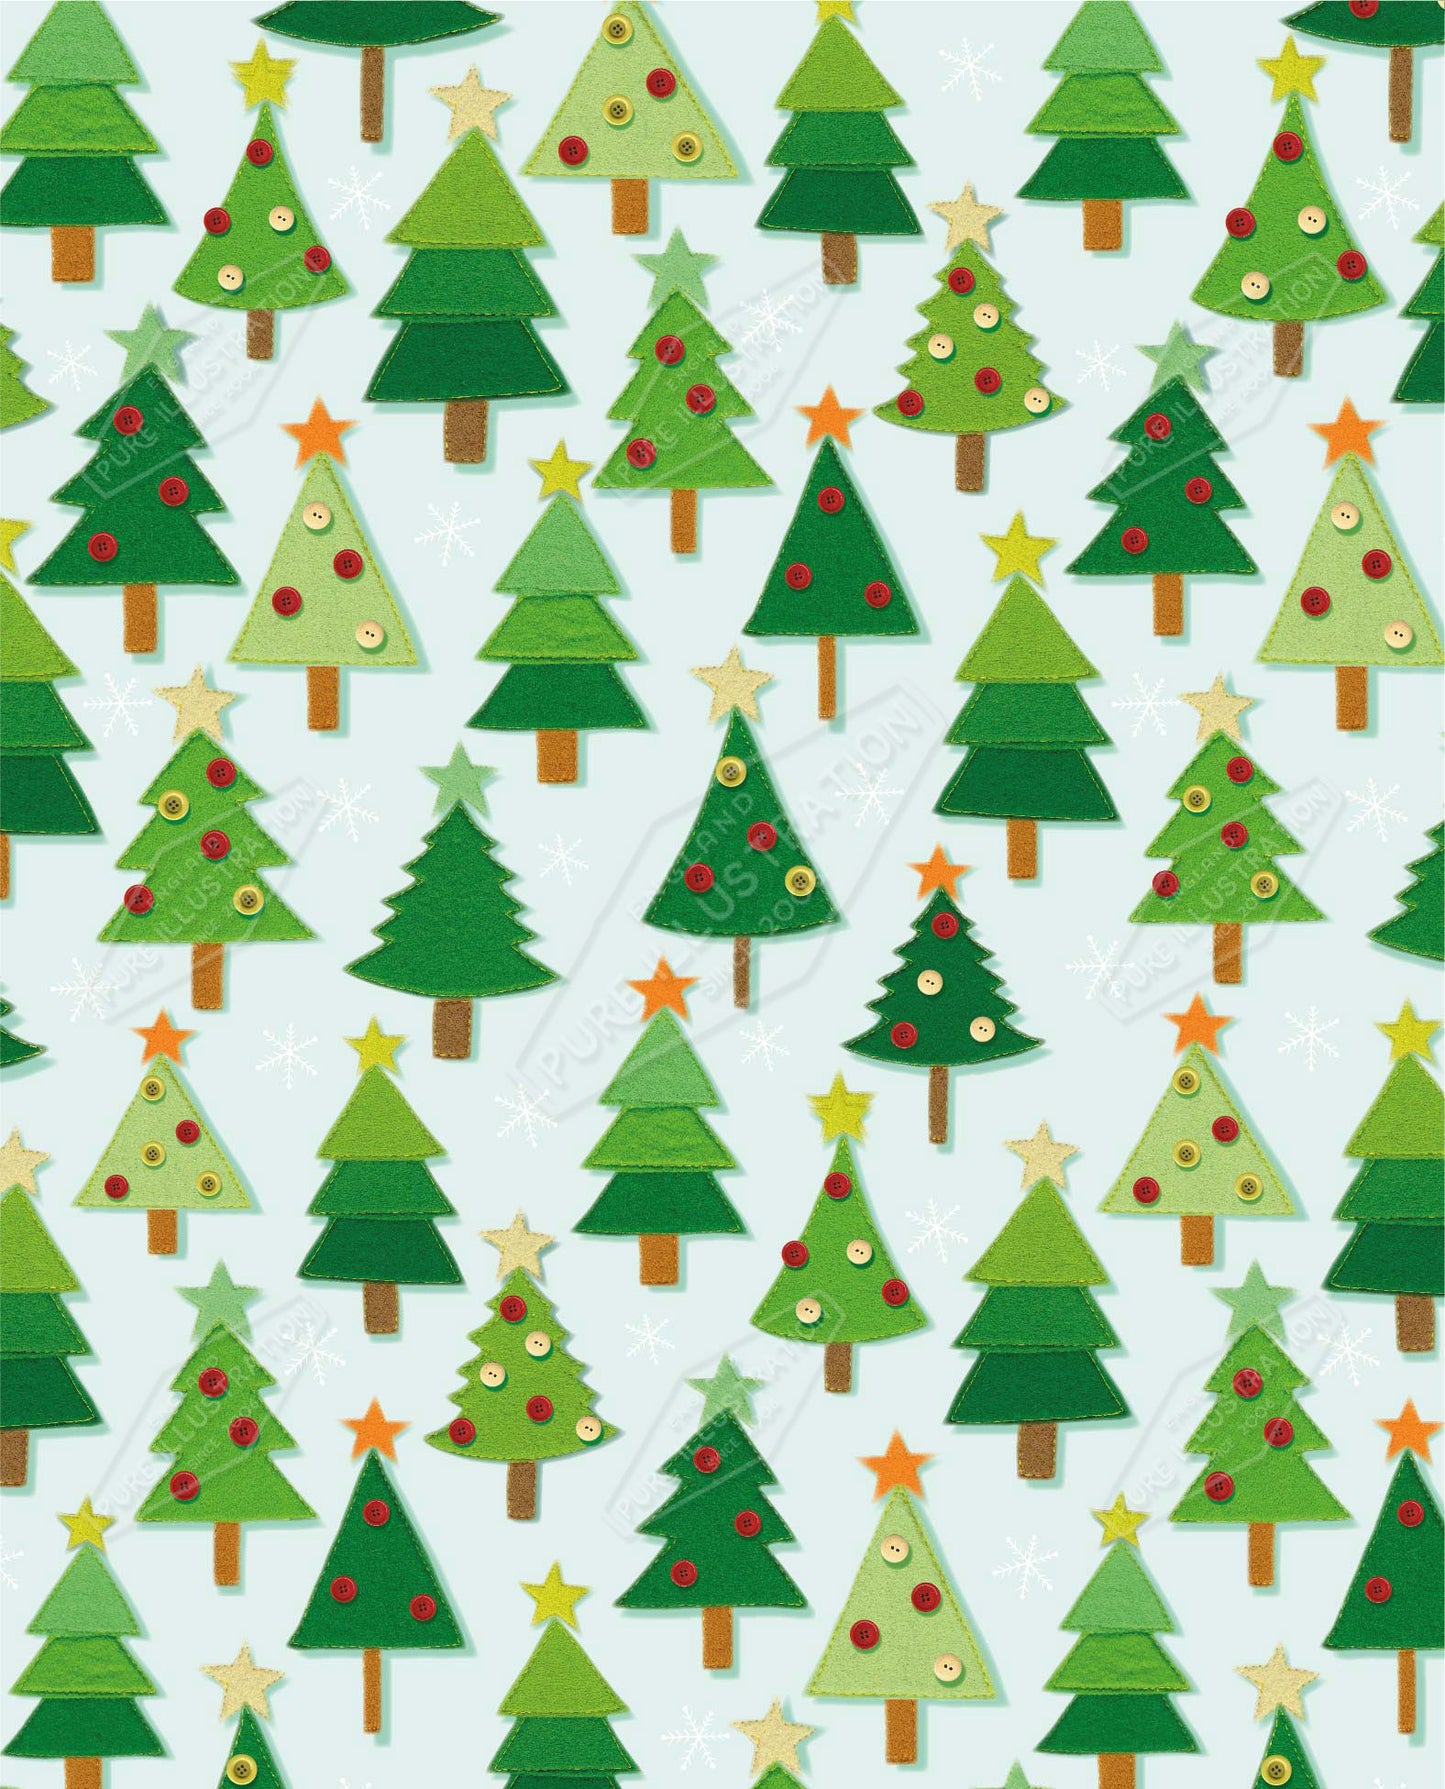 00035235SPI- Sarah Pitt is represented by Pure Art Licensing Agency - Christmas Pattern Design